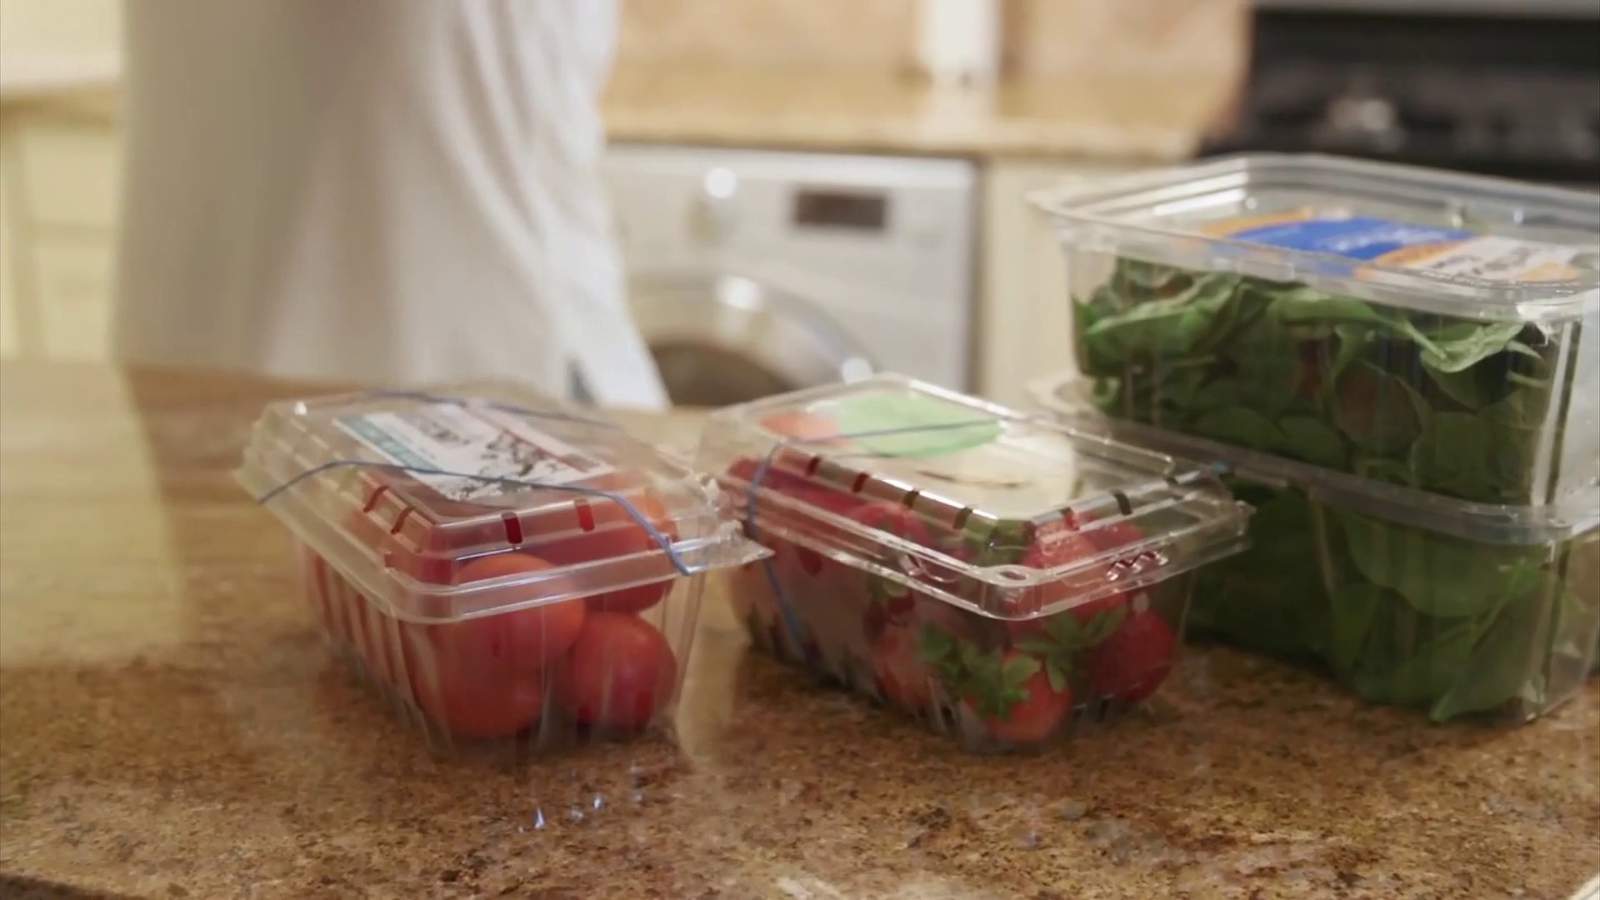 No need to wipe down groceries or takeout, experts say, but do wash your hands